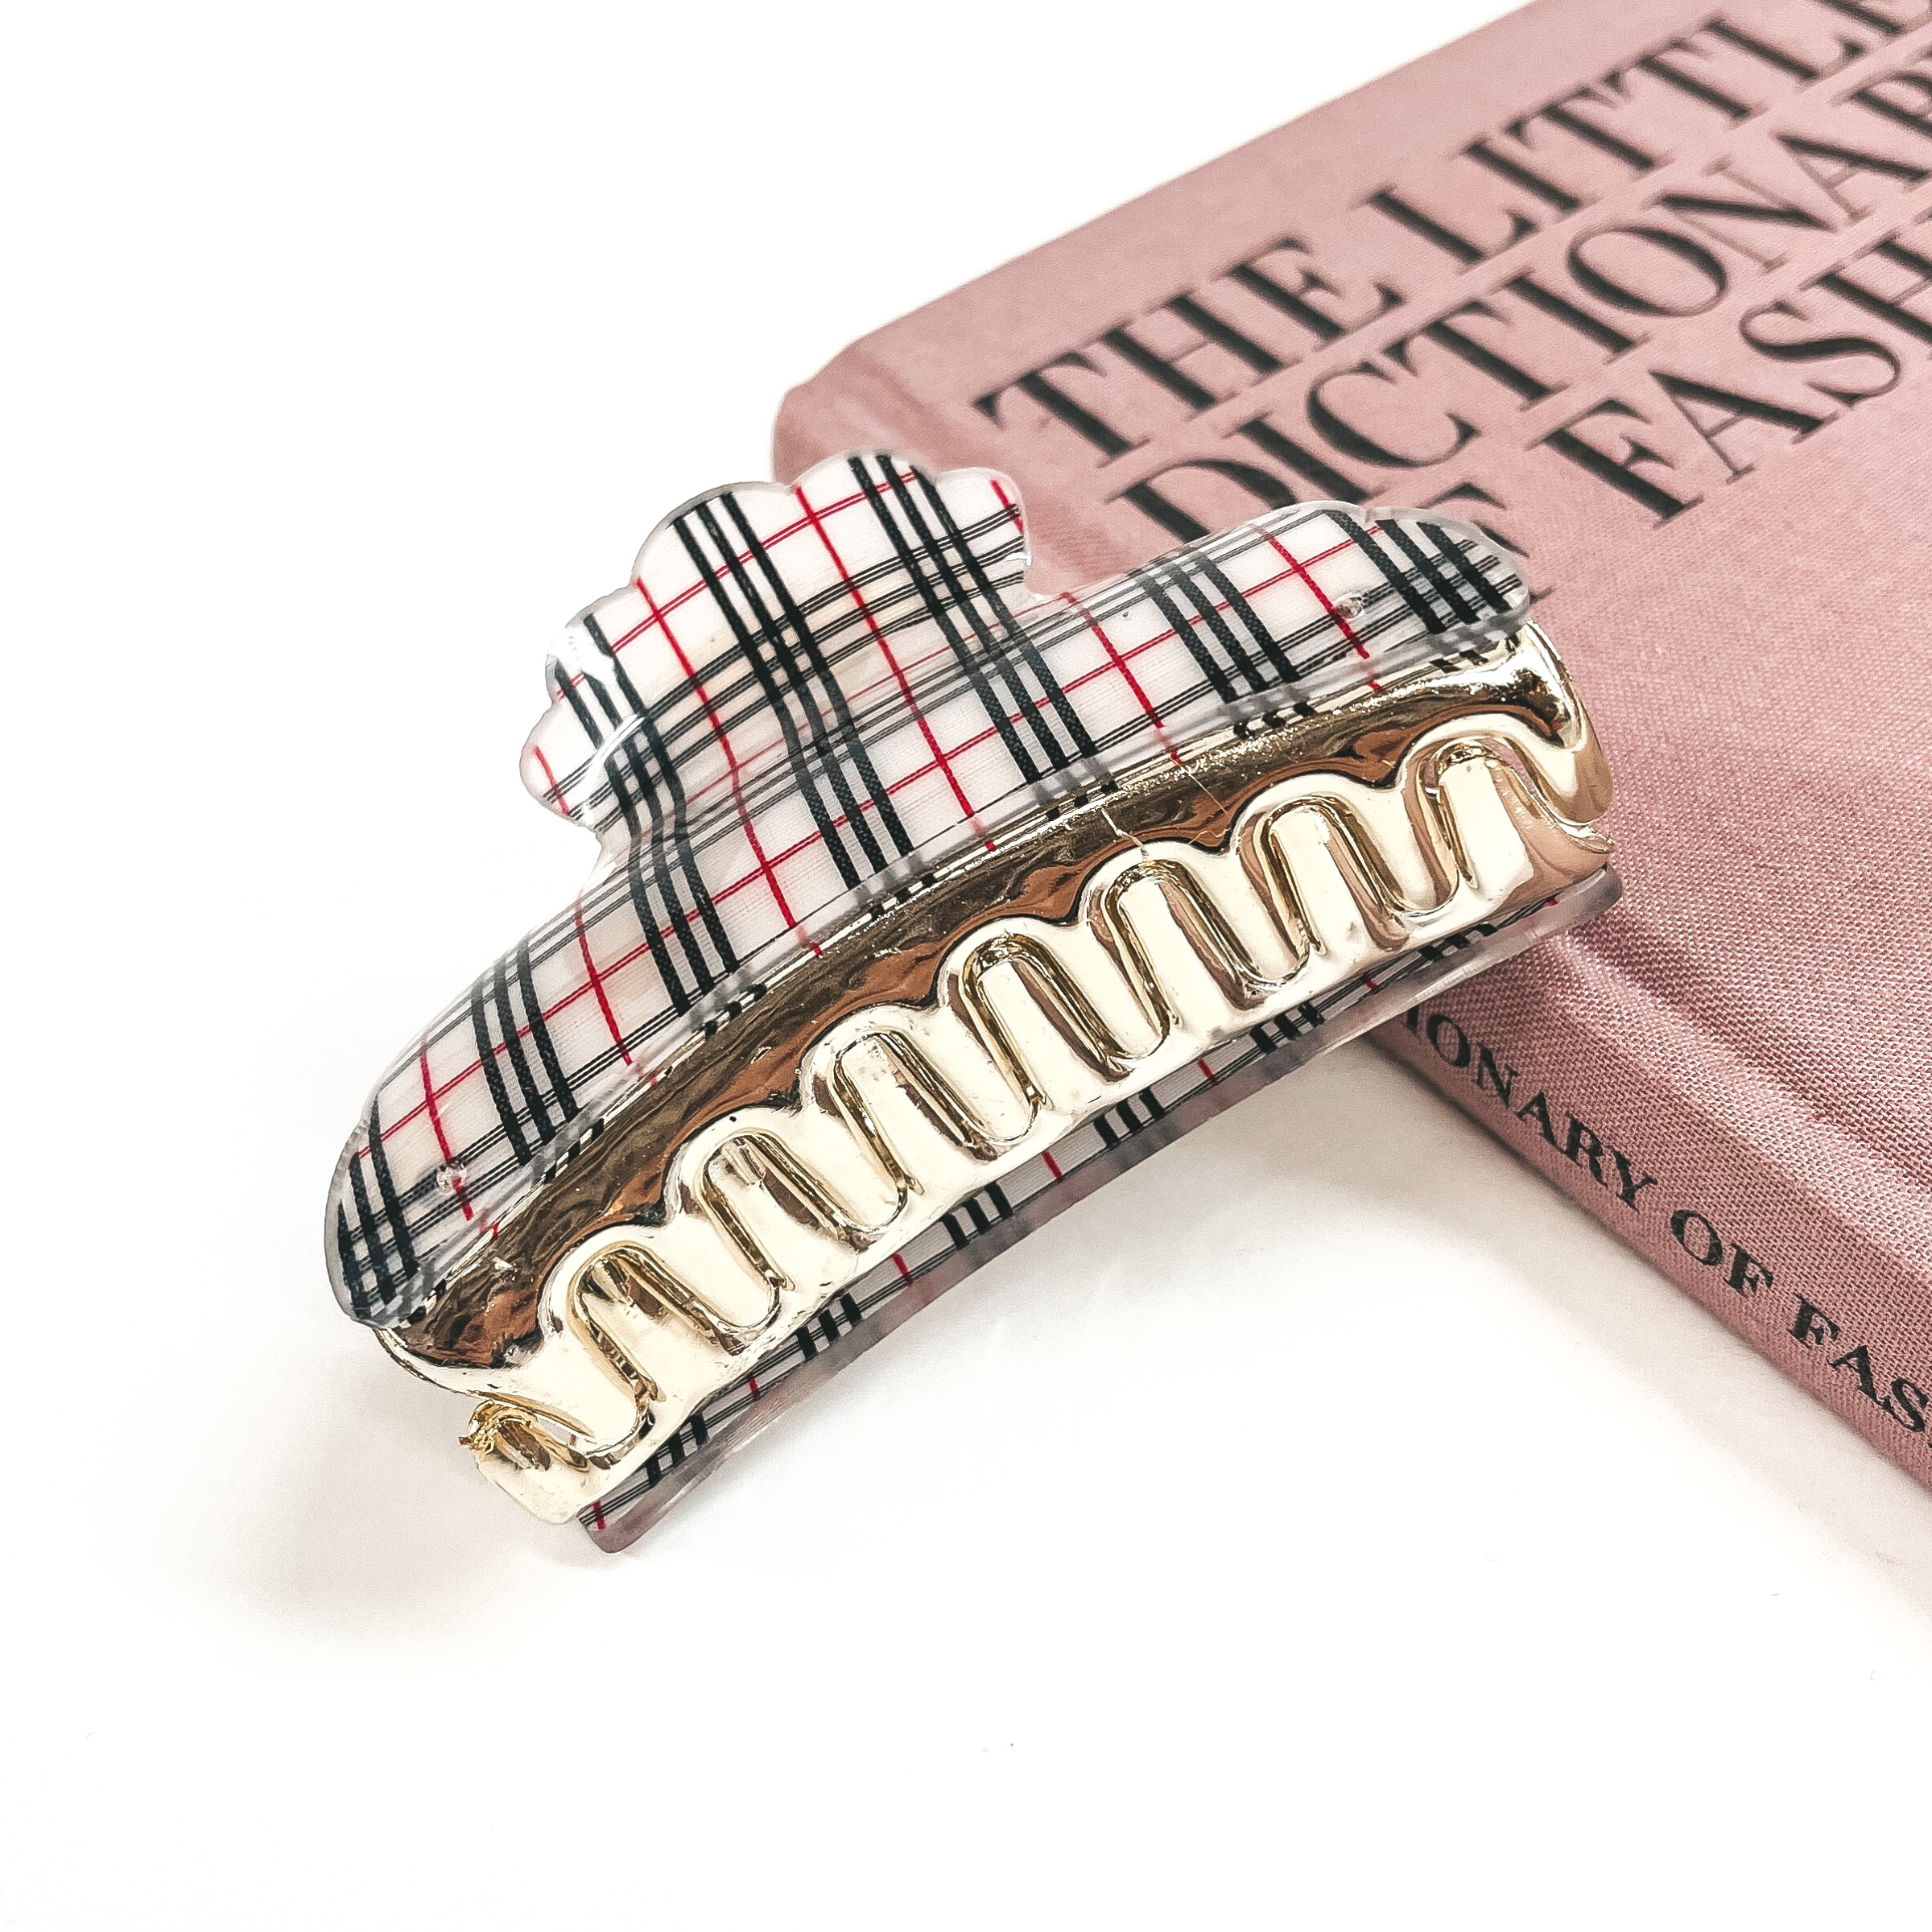 This is a gold and white plaid print hair clip laying on the side of a pink book and white background.